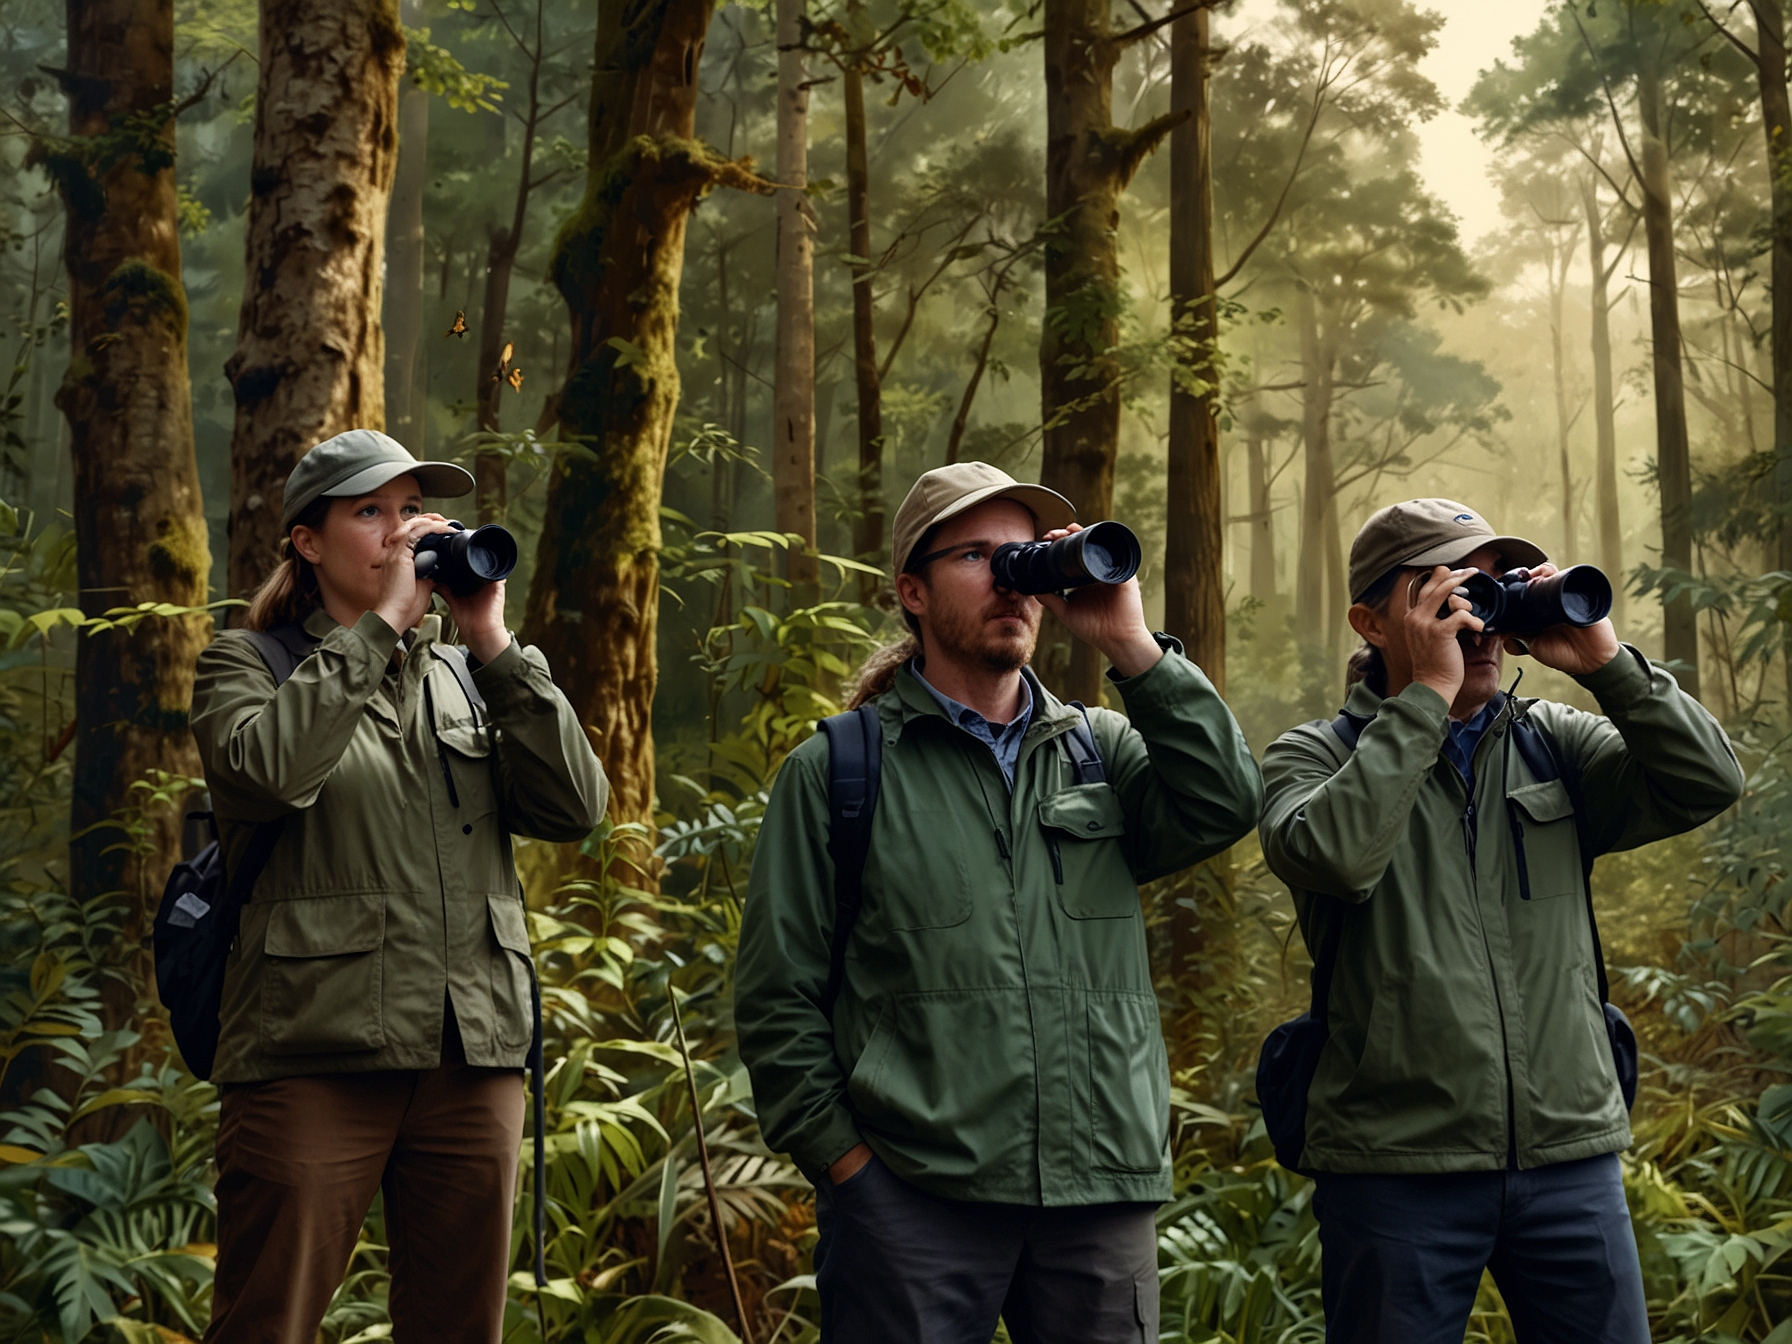 A group of birdwatchers, equipped with binoculars and cameras, observes a dense forest area. They are part of a global initiative to locate 126 'lost' bird species, contributing valuable data for conservation efforts.